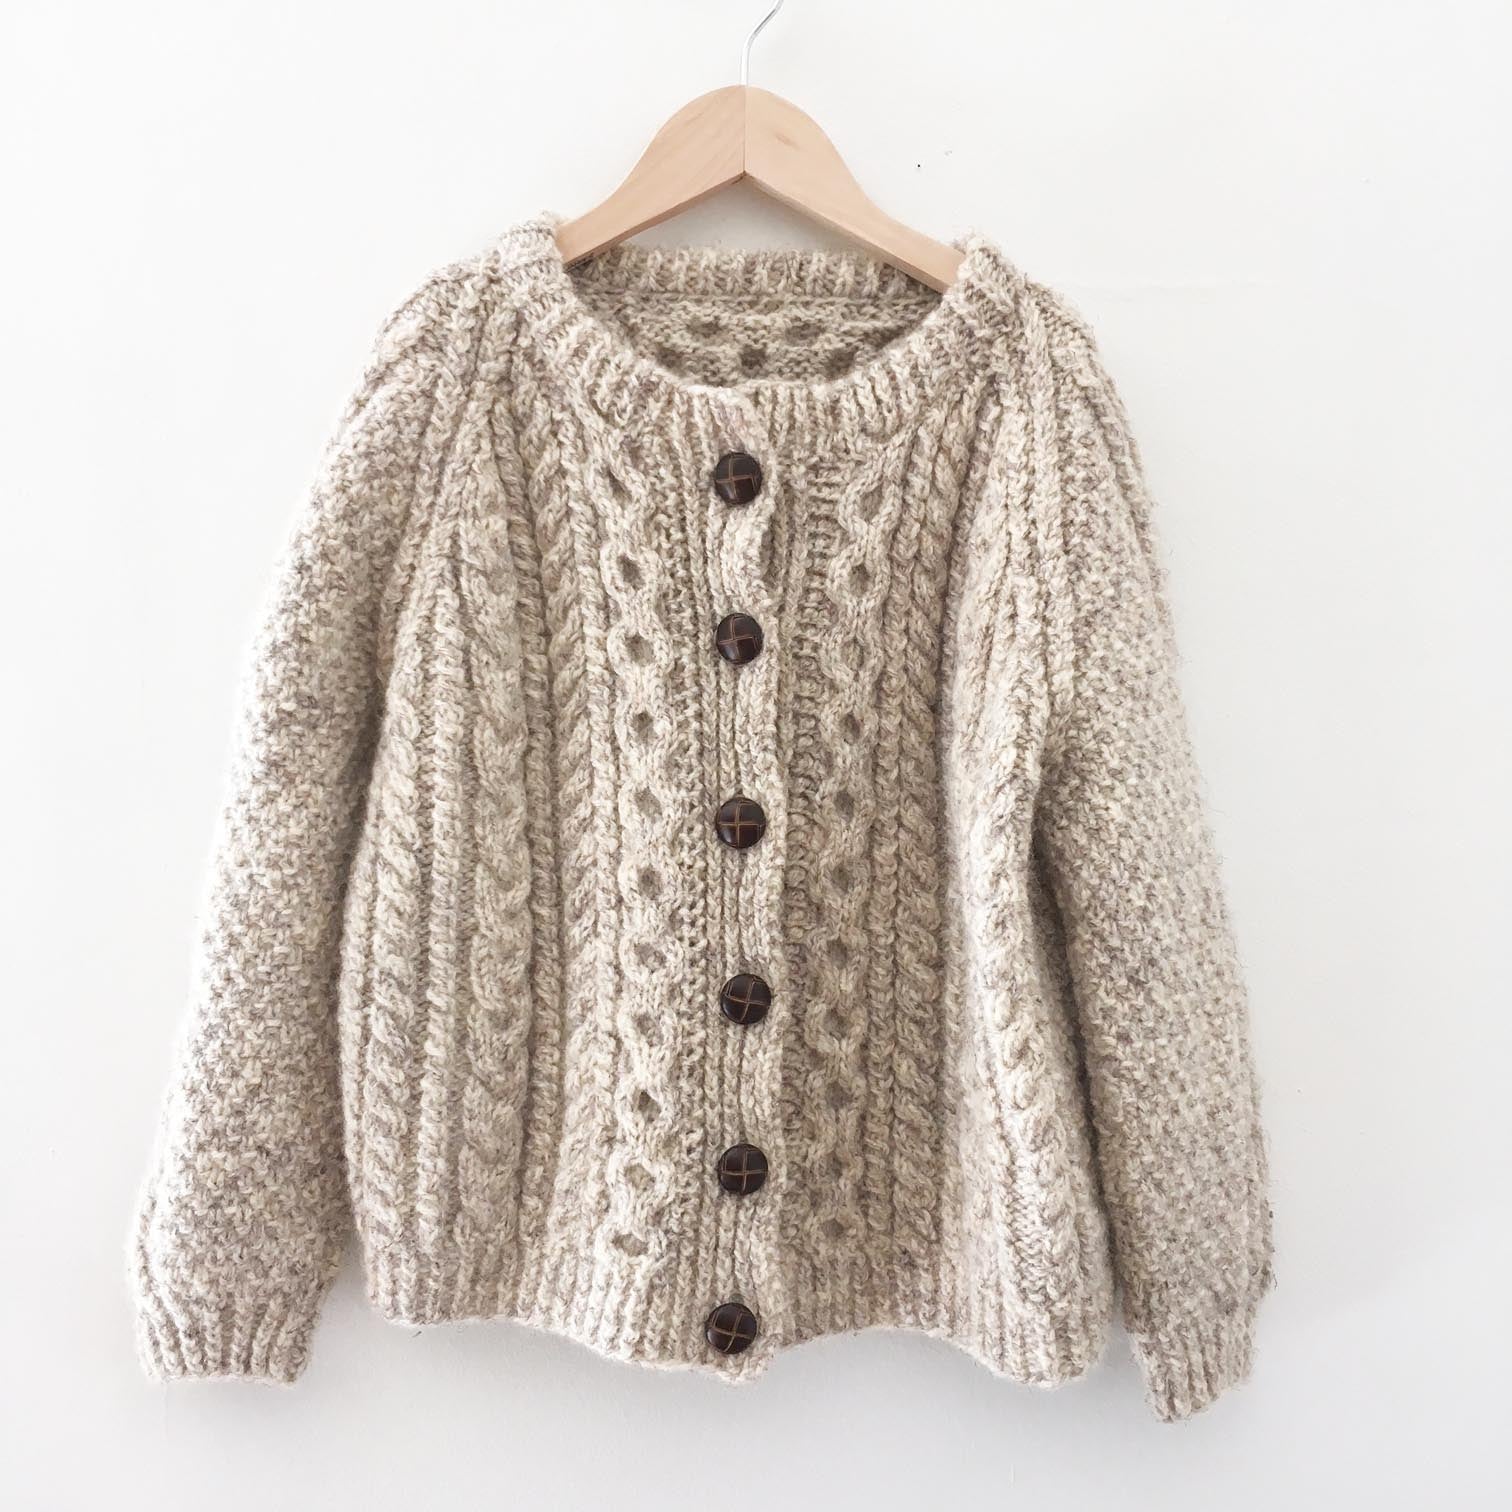 Cable knit cardigan size 10-12